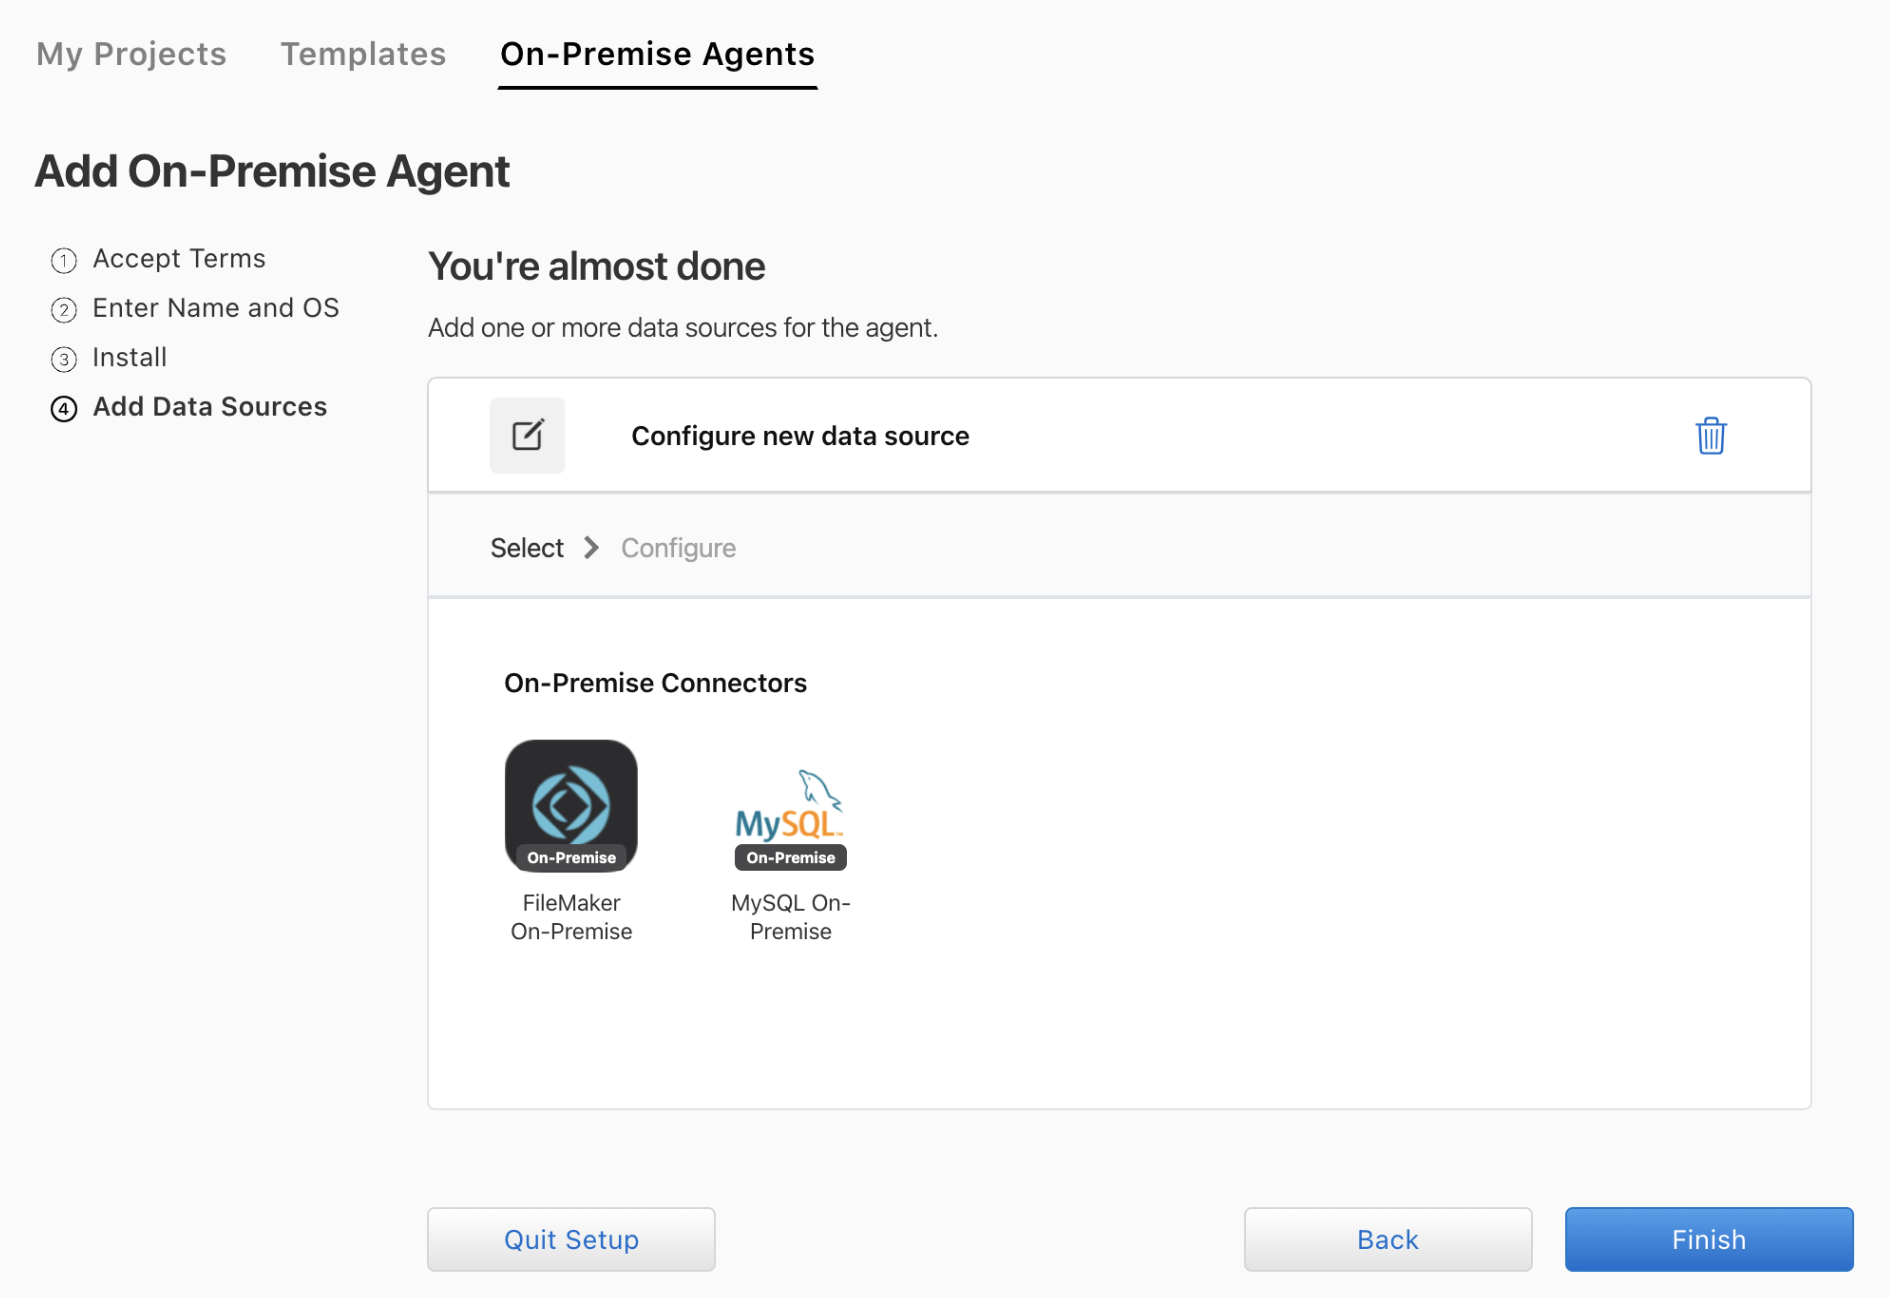 Add On-Premise Agents page-showing On-Prem connectors